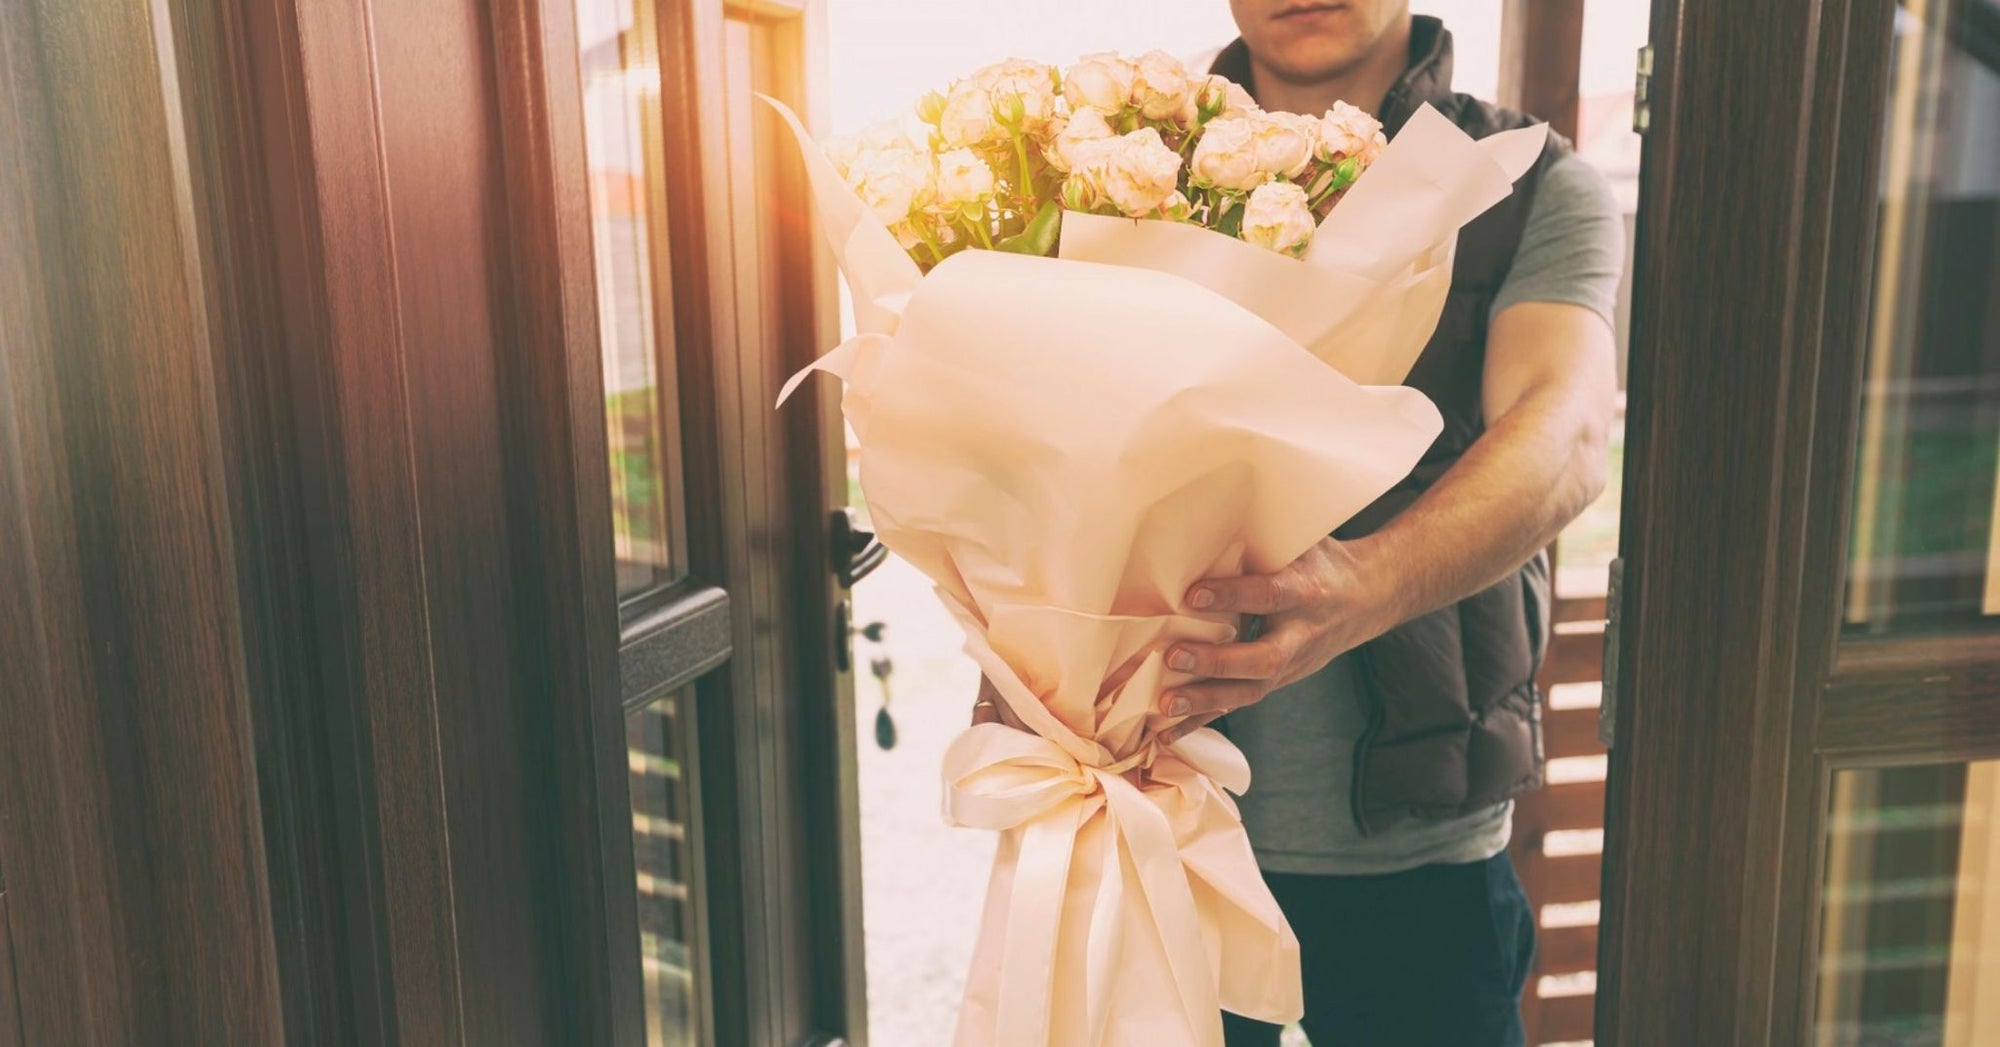 <a href="https://www.jim-reviews.com/best-same-day-flower-delivery-singapore/" target="_blank">JimReviews</a>